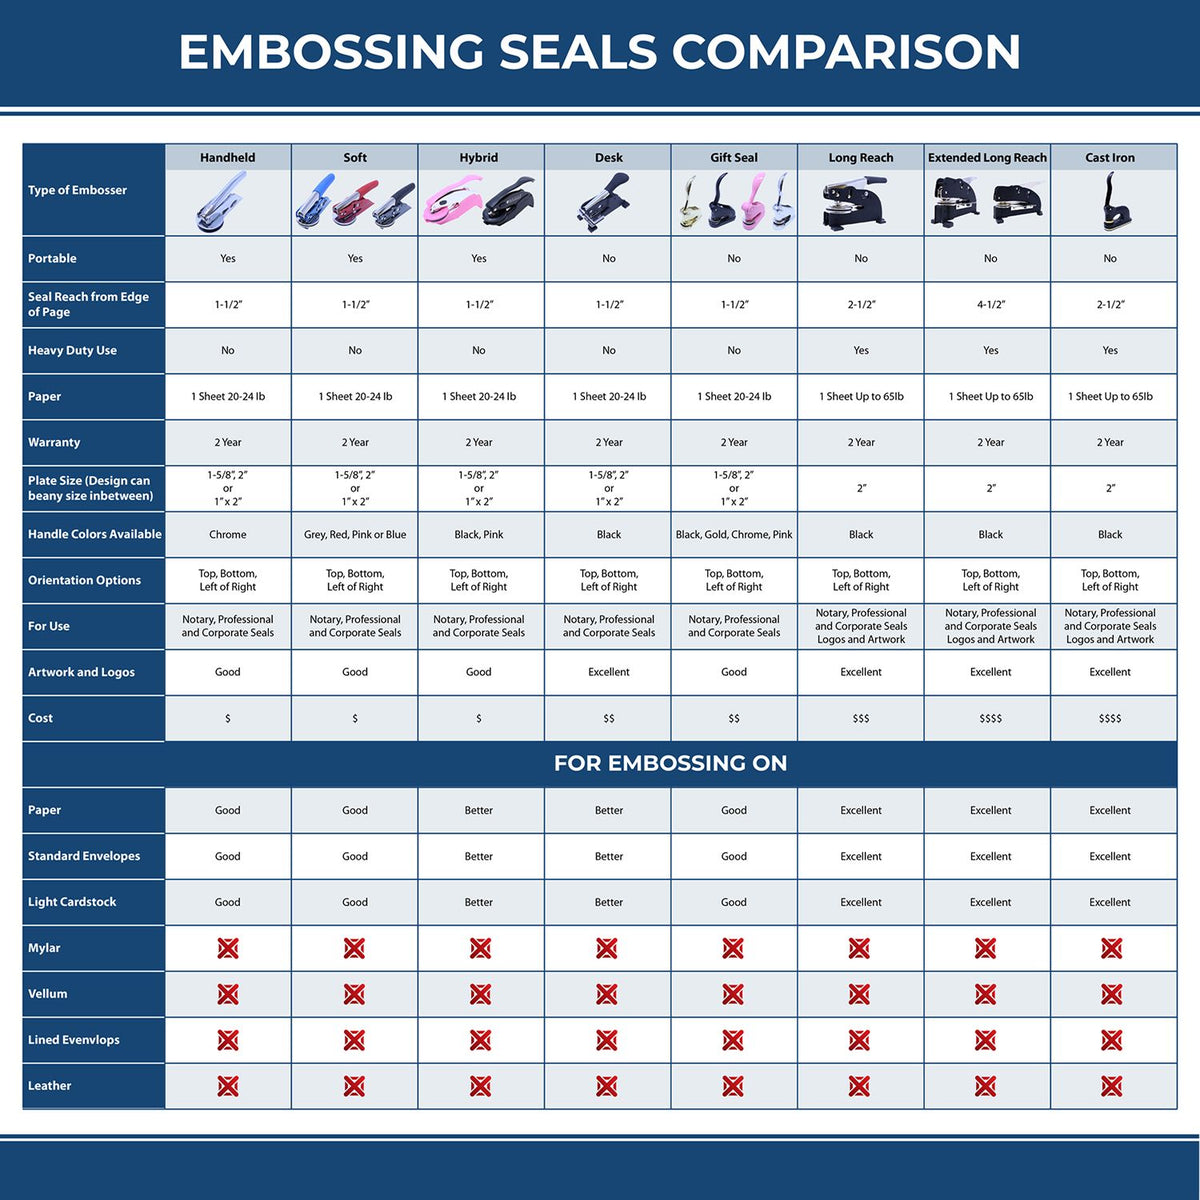 A comparison chart for the different types of mount models available for the Heavy Duty Cast Iron Iowa Geologist Seal Embosser